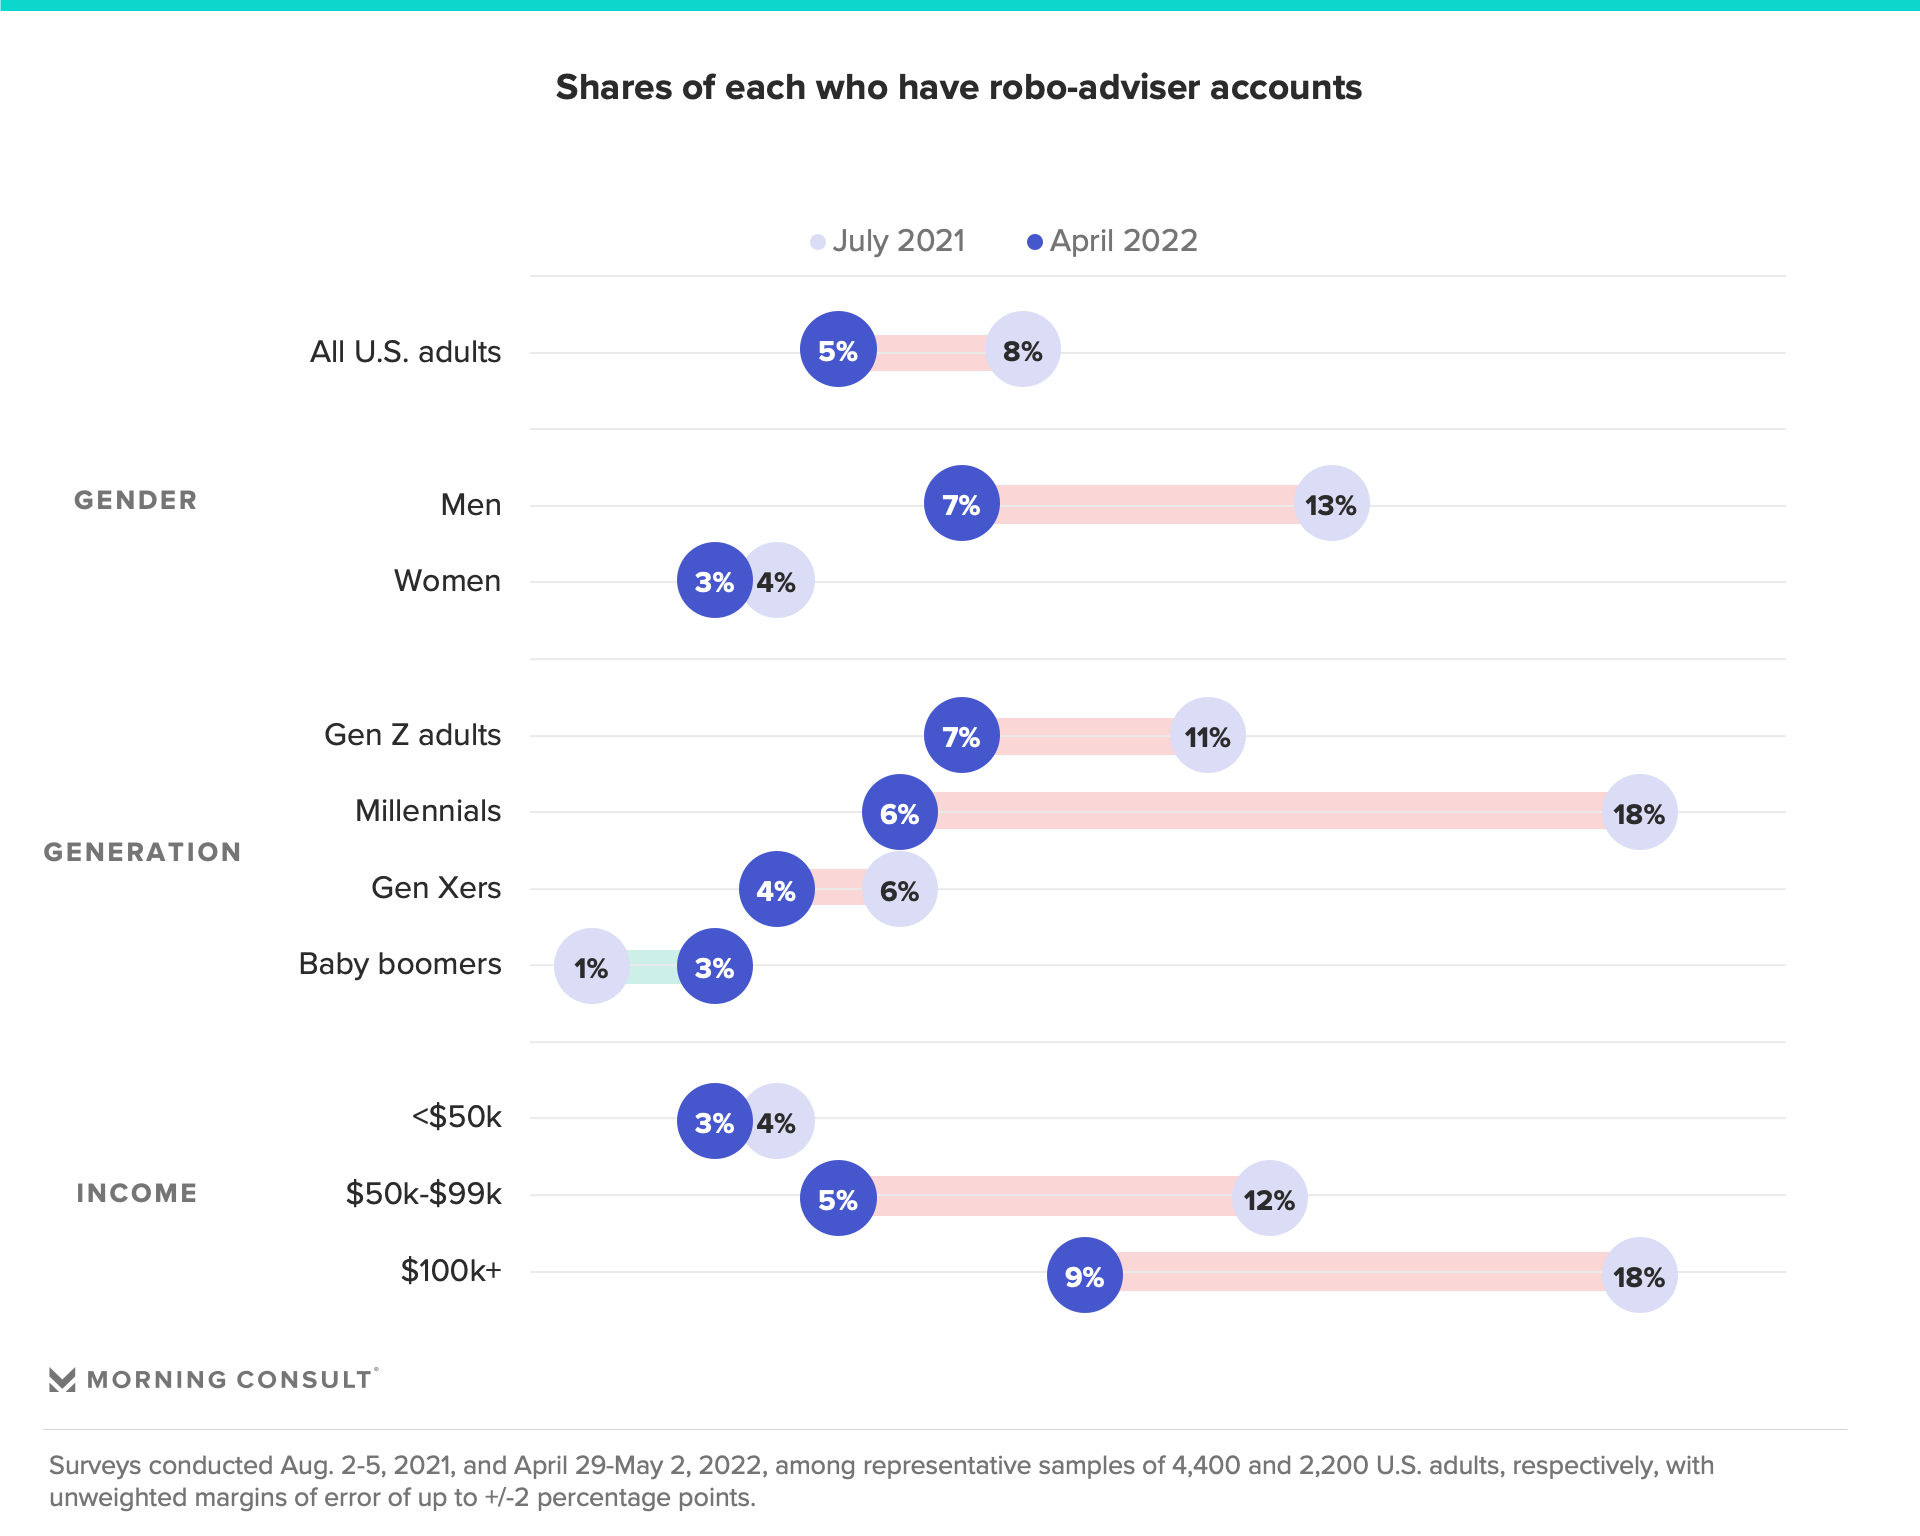 Graph showing share of U.S. adults in 2021 and 2022 who have robo-adviser accounts by gender, generation and income